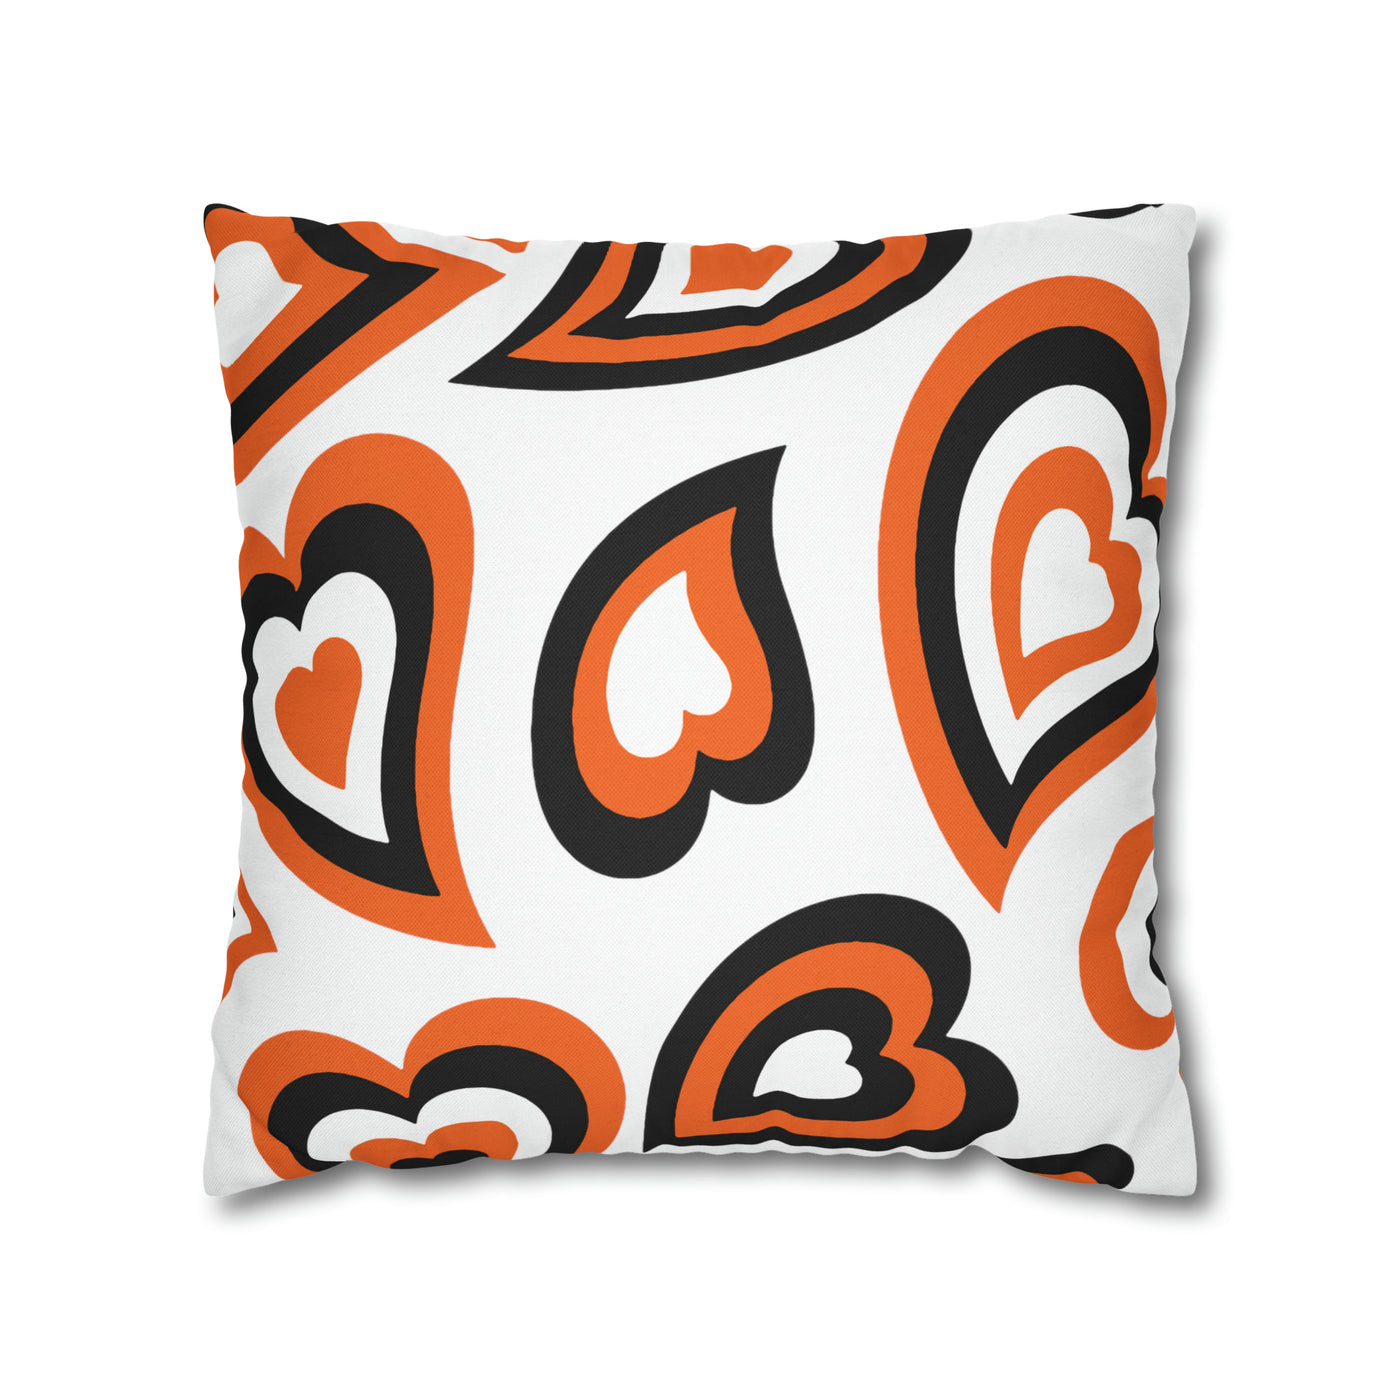 Retro Heart Pillow - Orange and Black, Heart Pillow, Hearts, Valentine's Day, Princeton, Bed Party Pillow, Sleepaway Camp Pillow, Camp Lenox